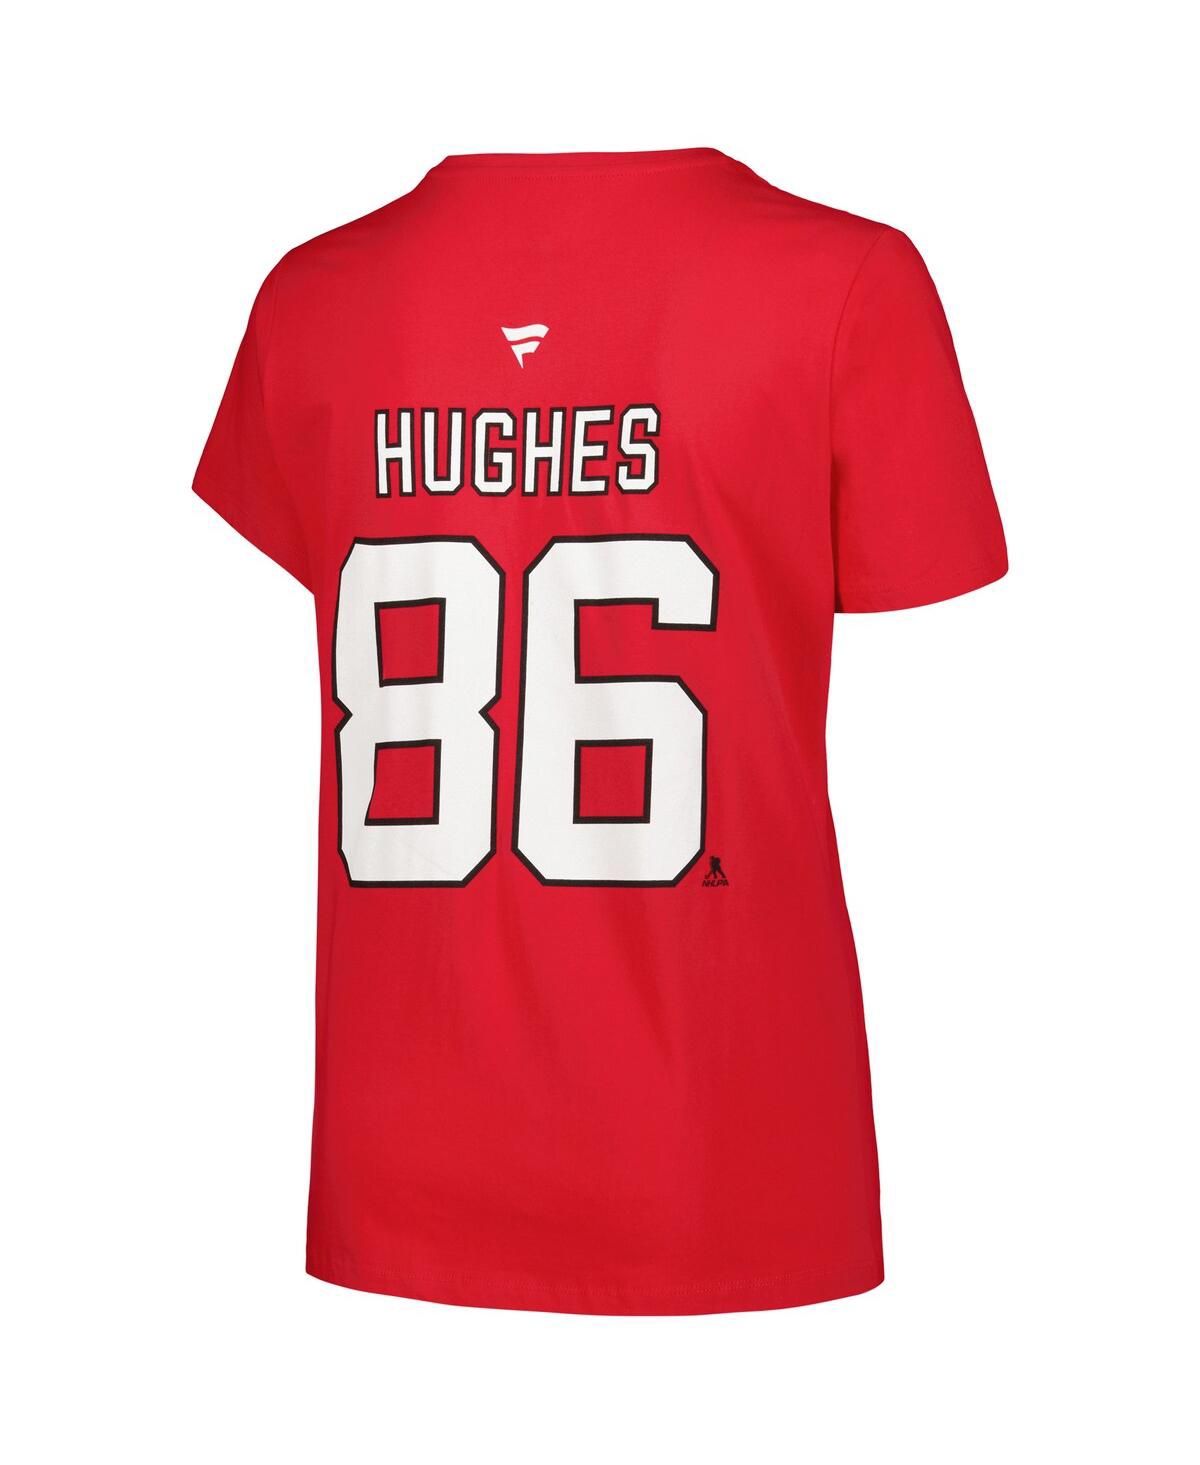 Shop Fanatics Branded Women's Jack Hughes Red New Jersey Devils Plus Size Name Number T-shirt